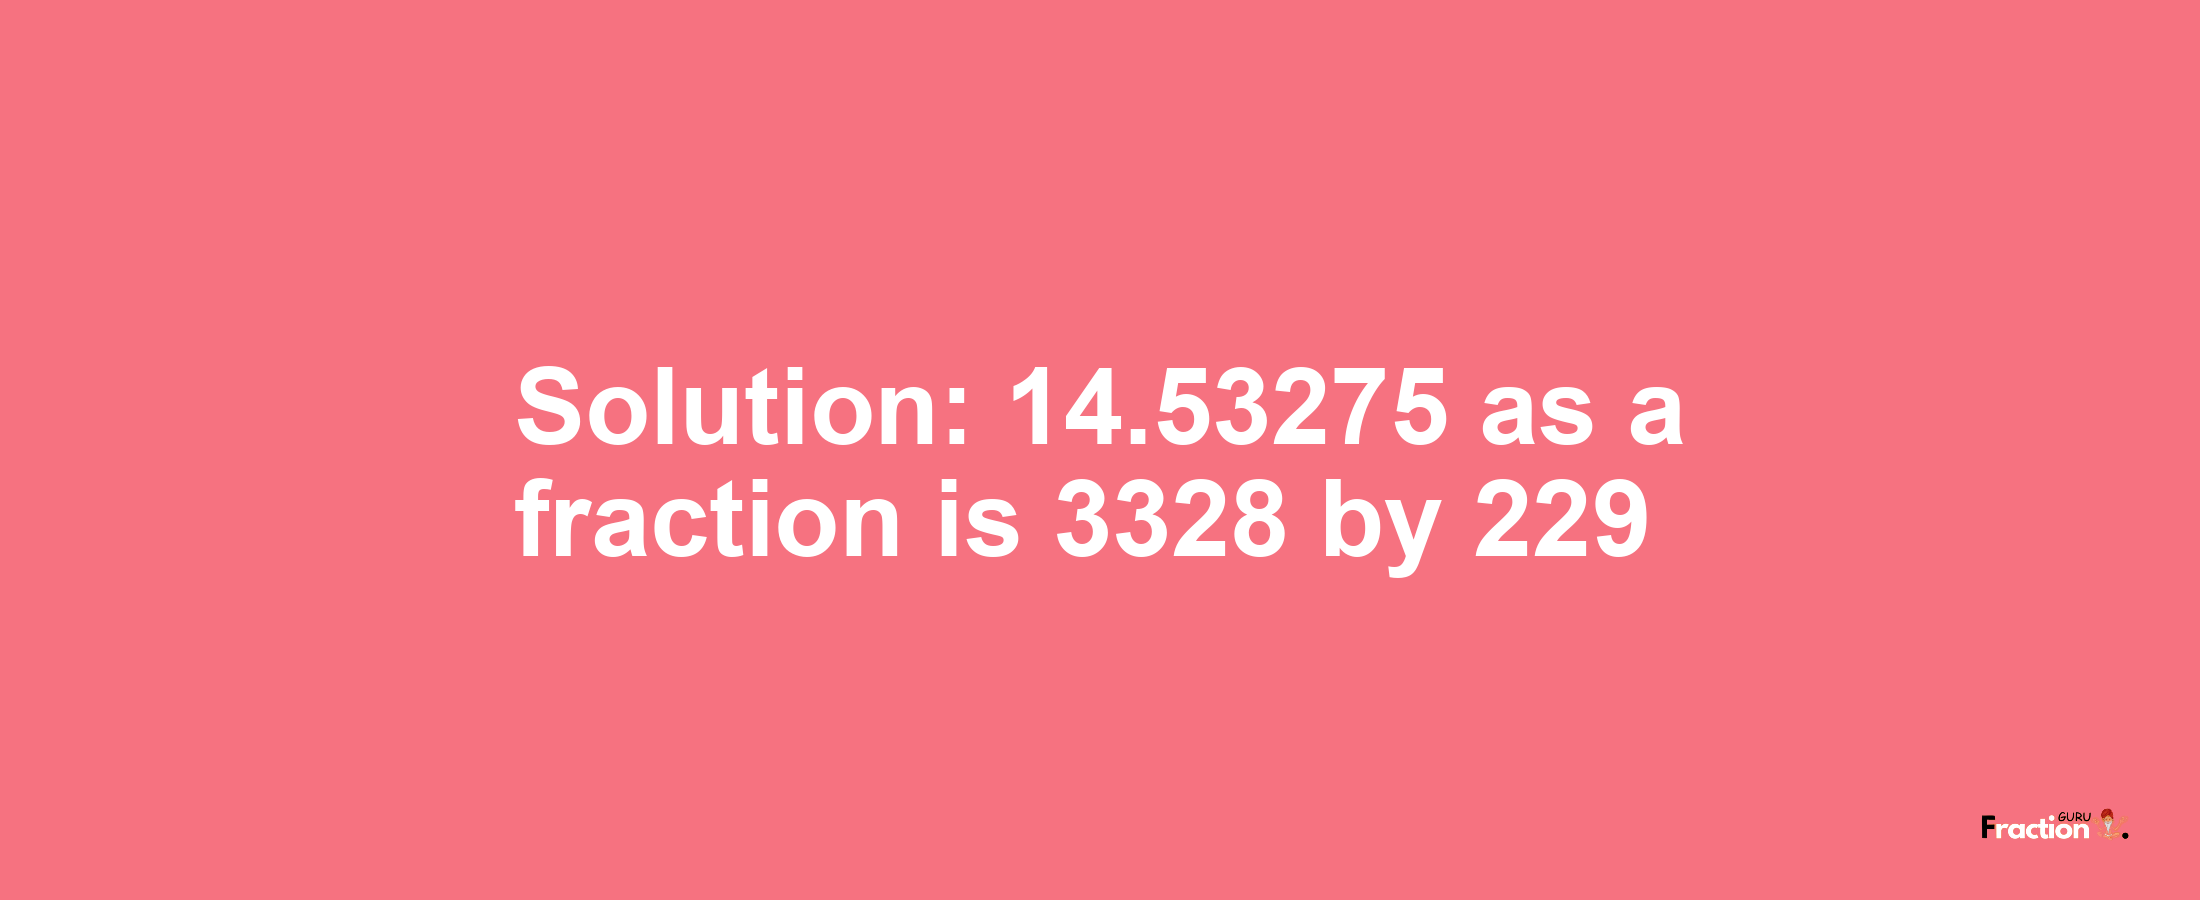 Solution:14.53275 as a fraction is 3328/229